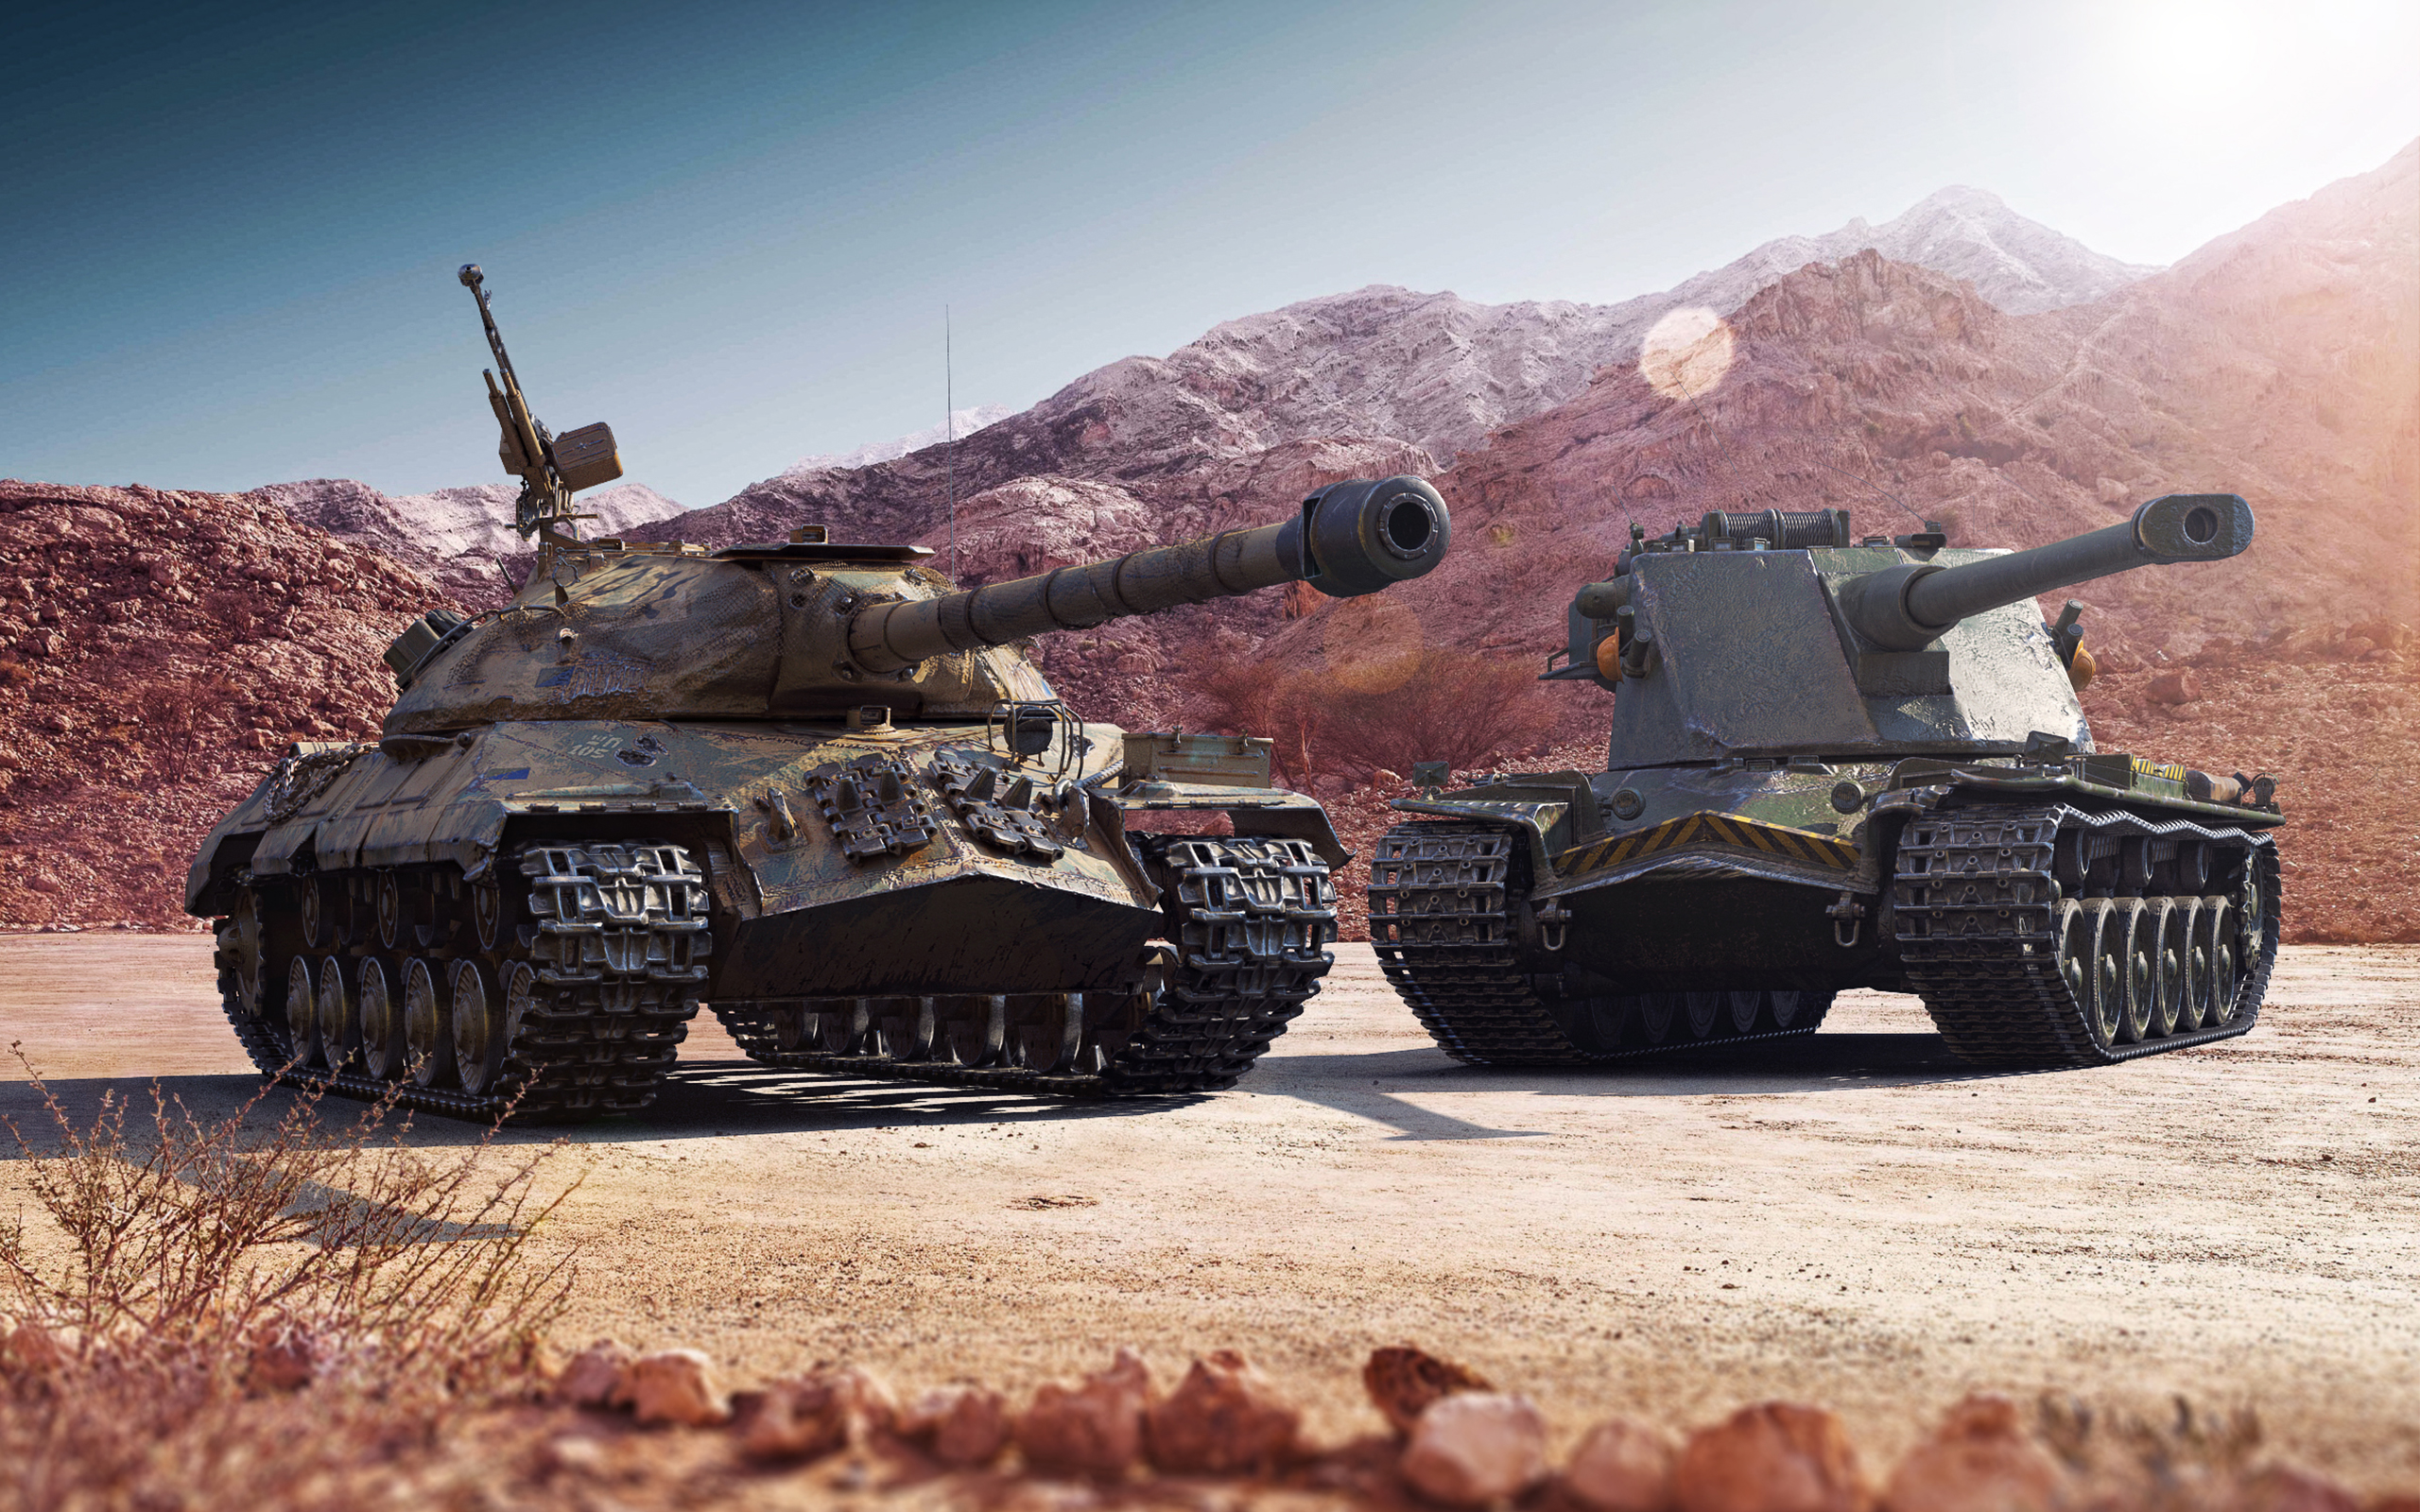 World Of Tanks Wallpapers